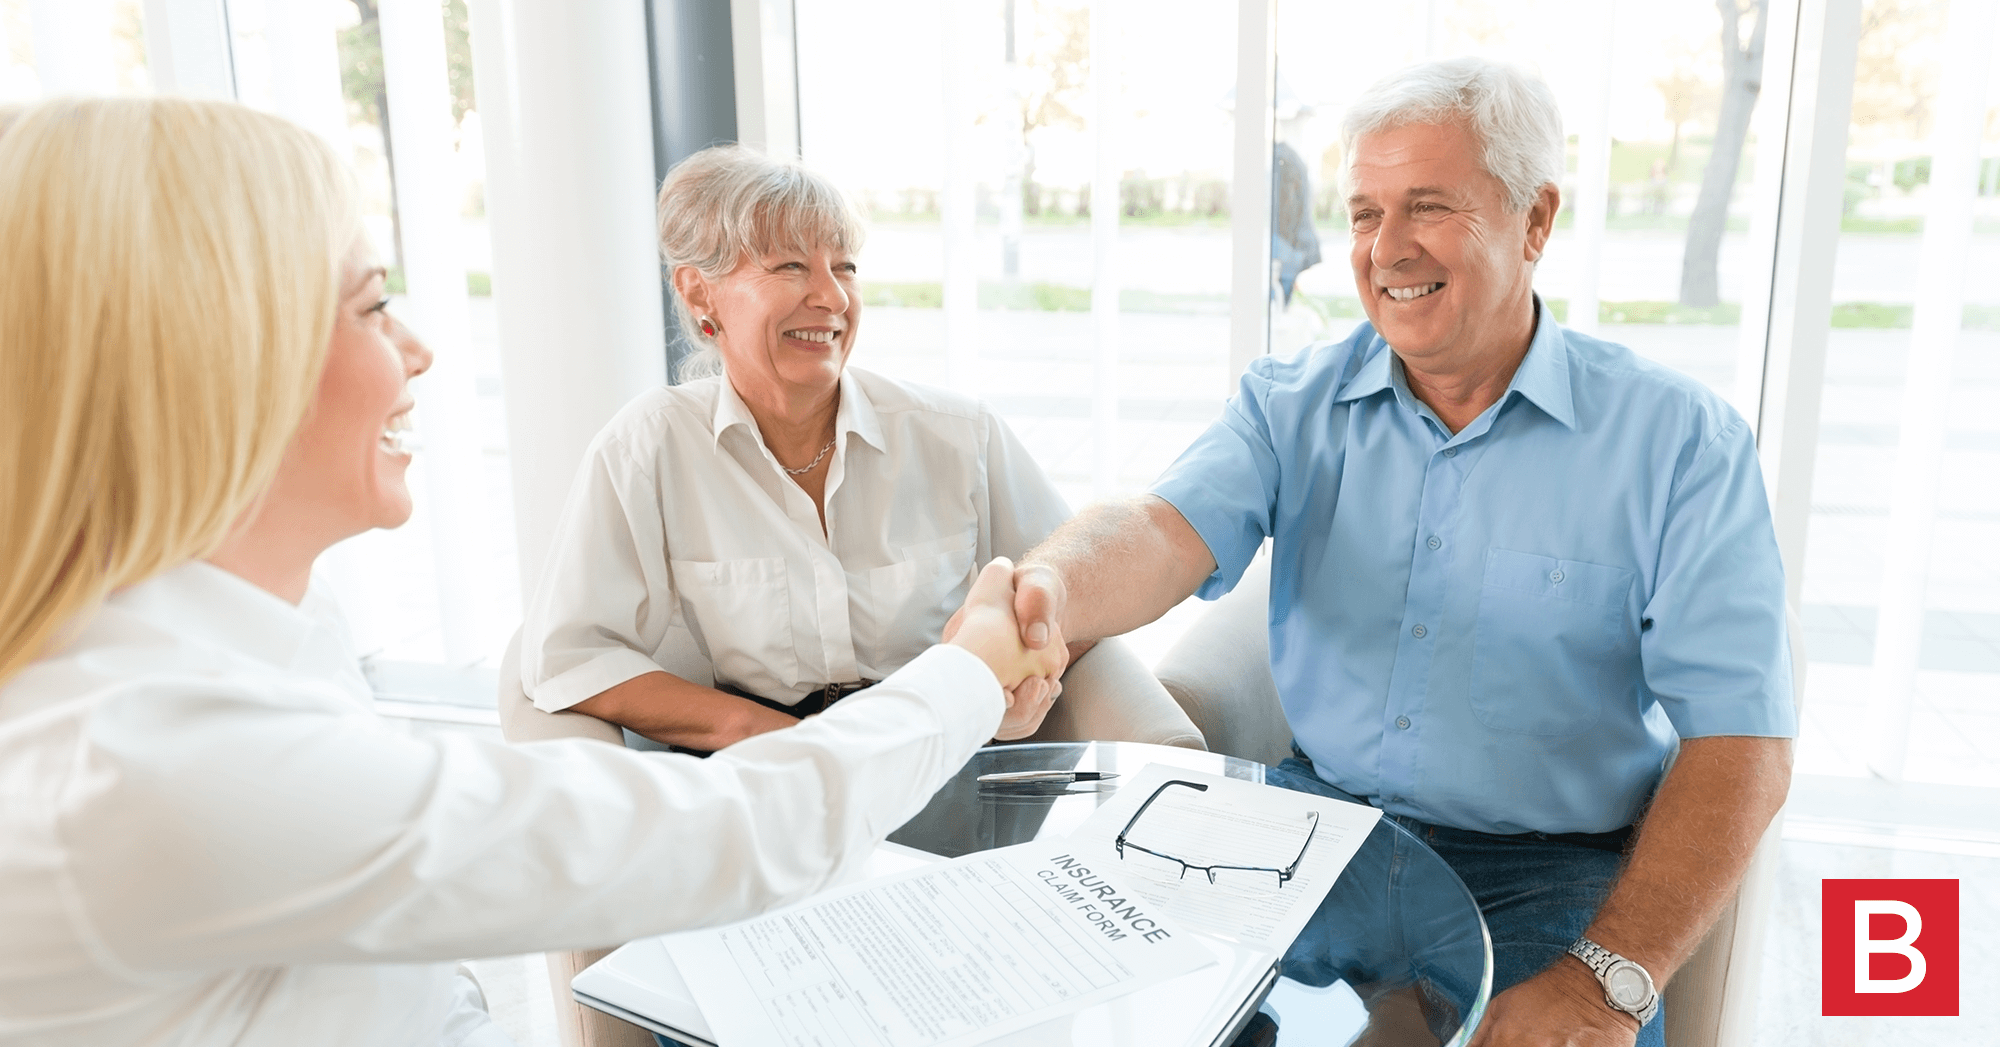 Things to Consider if You Need an Elder Law Attorney